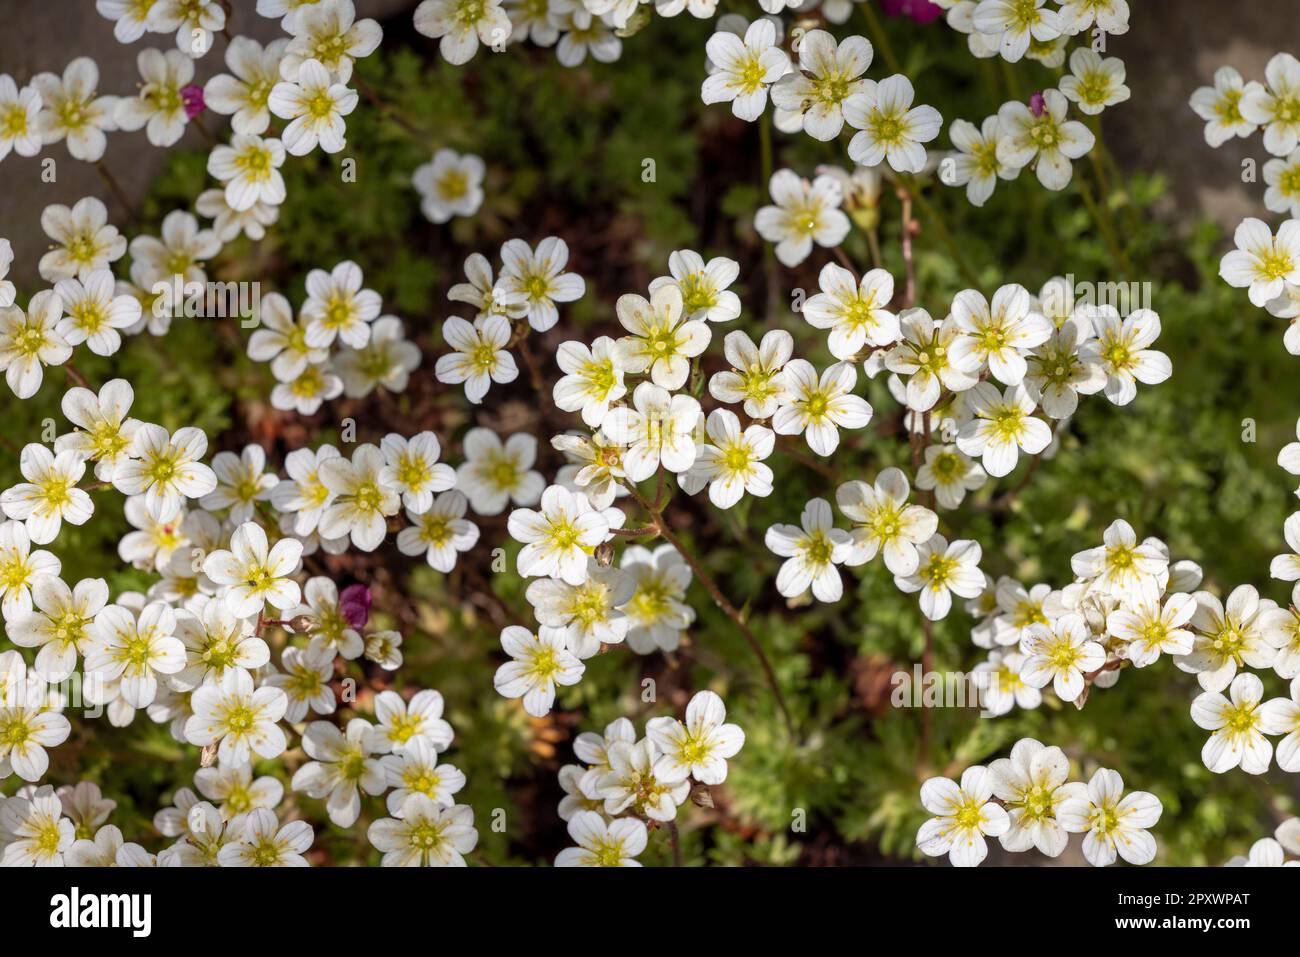 Beautiful spring flowers of Saxifraga × arendsii blooming in the garden, close up Stock Photo